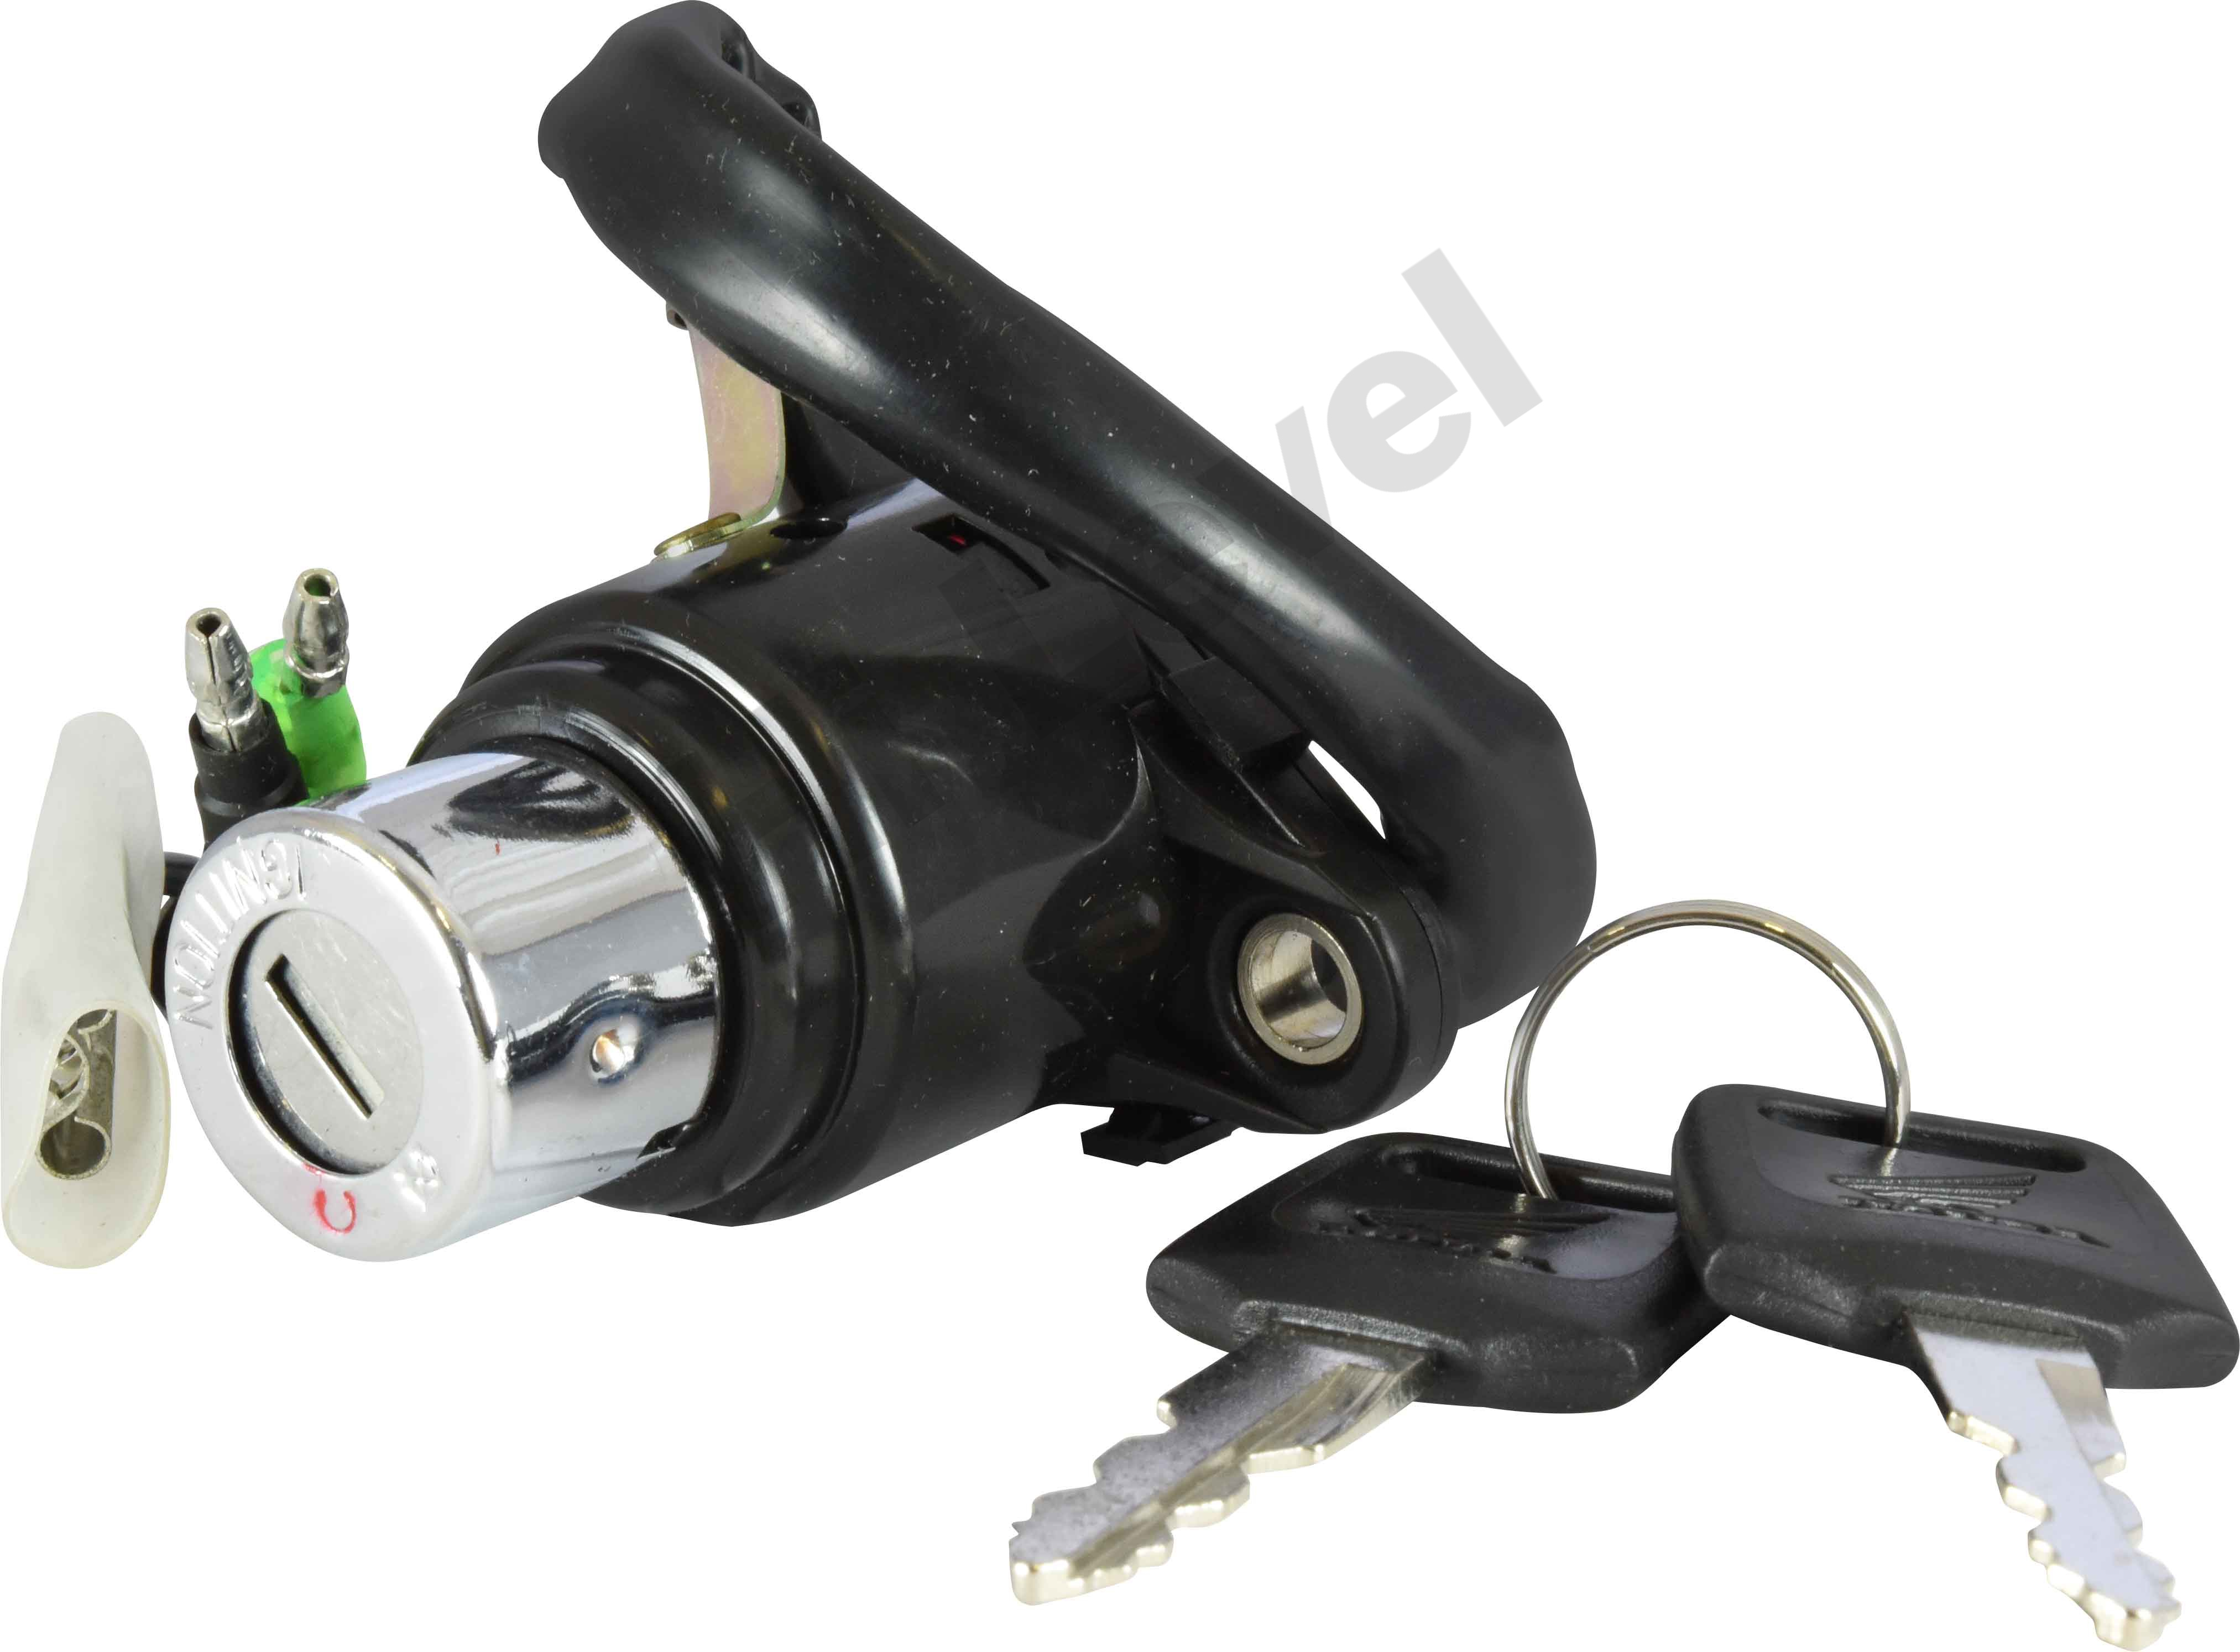 HONDA C50, C70 STYLE OFFSET MOUNTING (4 WIRES) IGNITION SWITCH